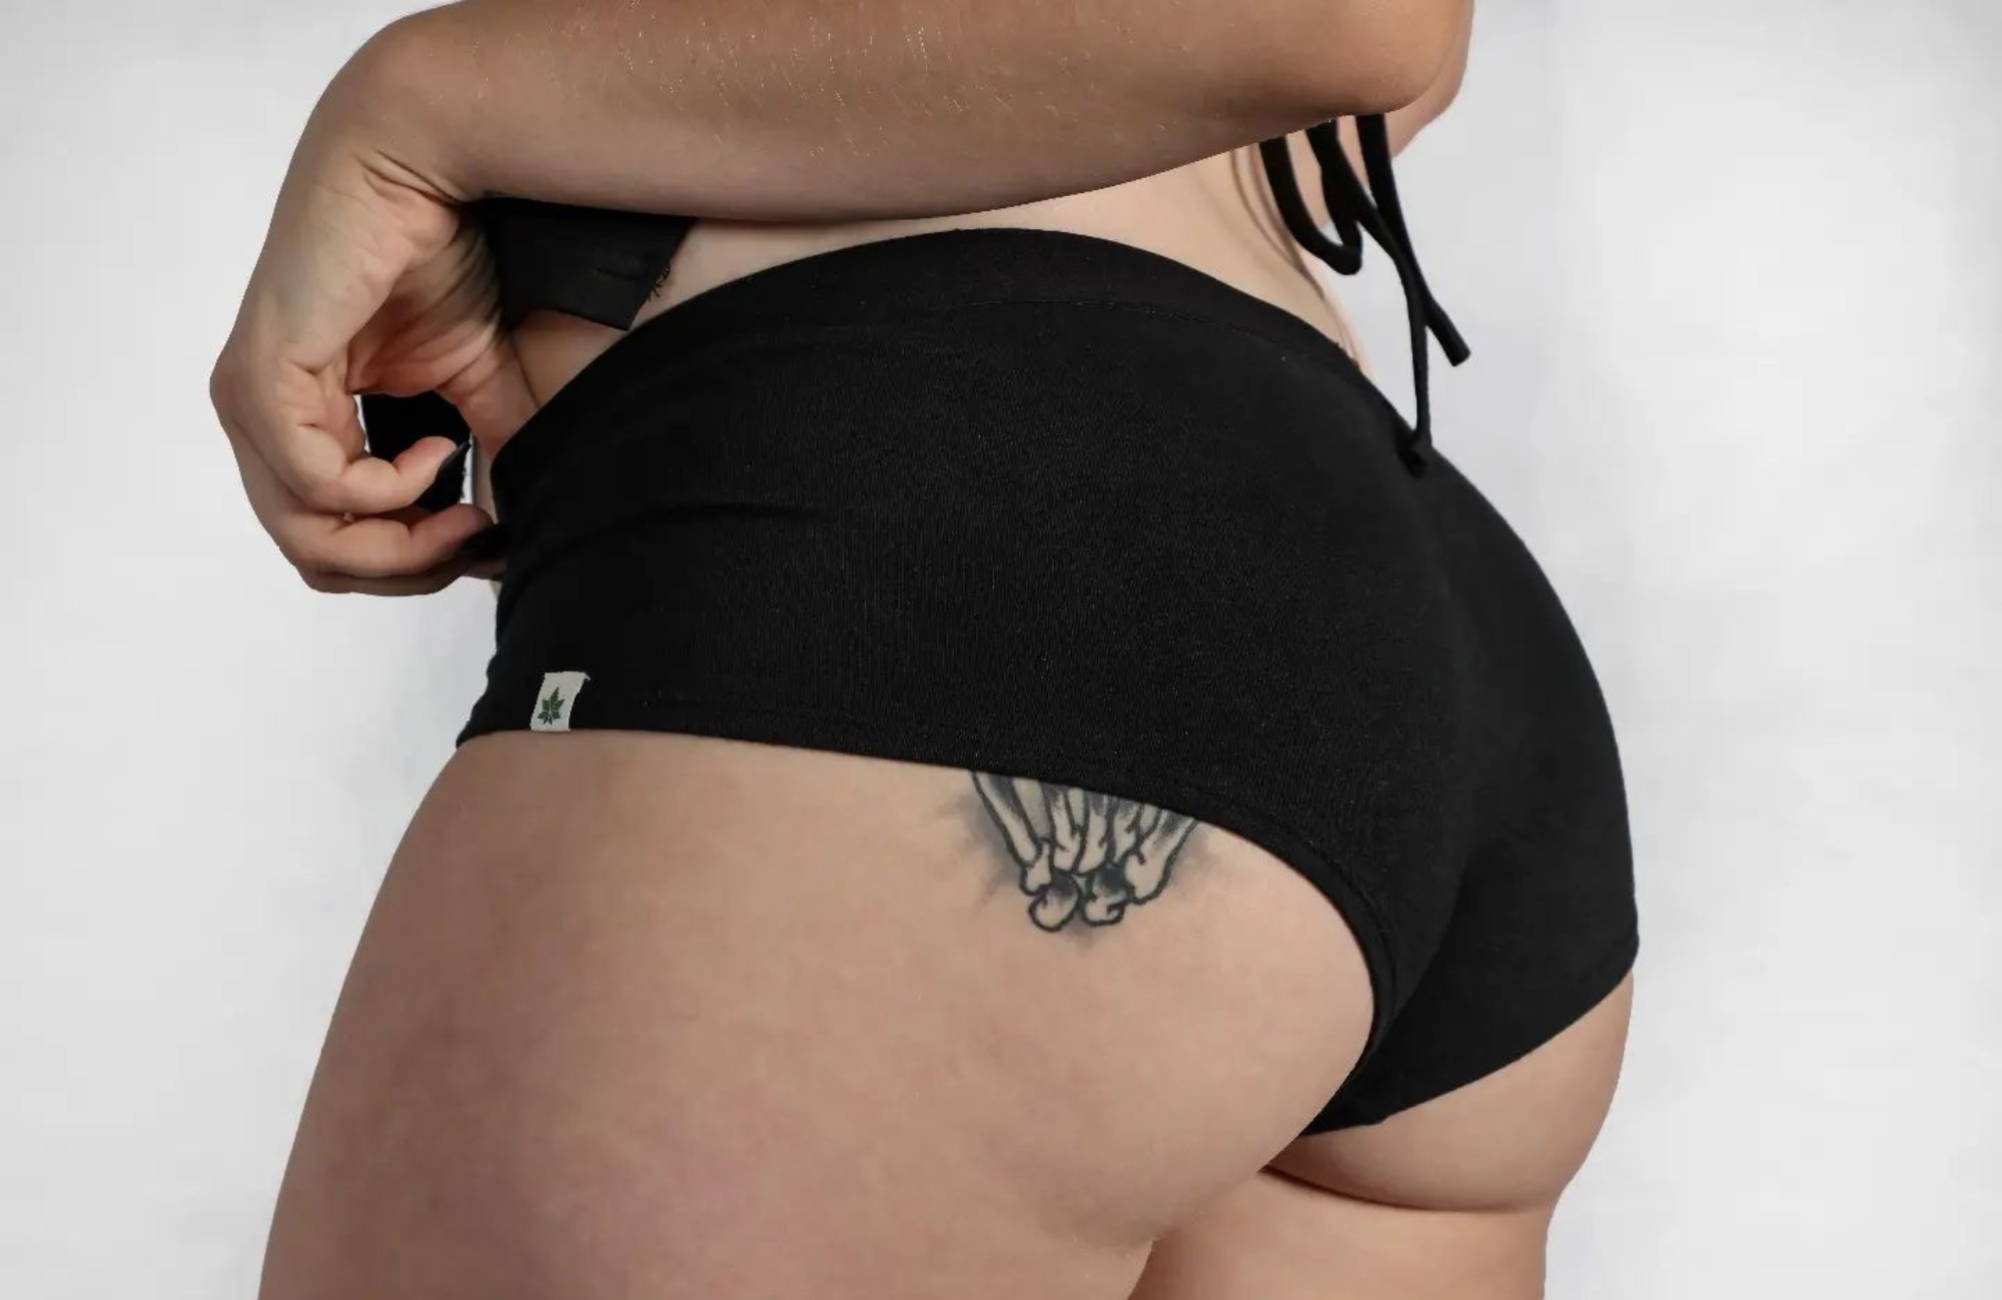 close-up of a woman’s tattooed butt wearing a black pair of undies